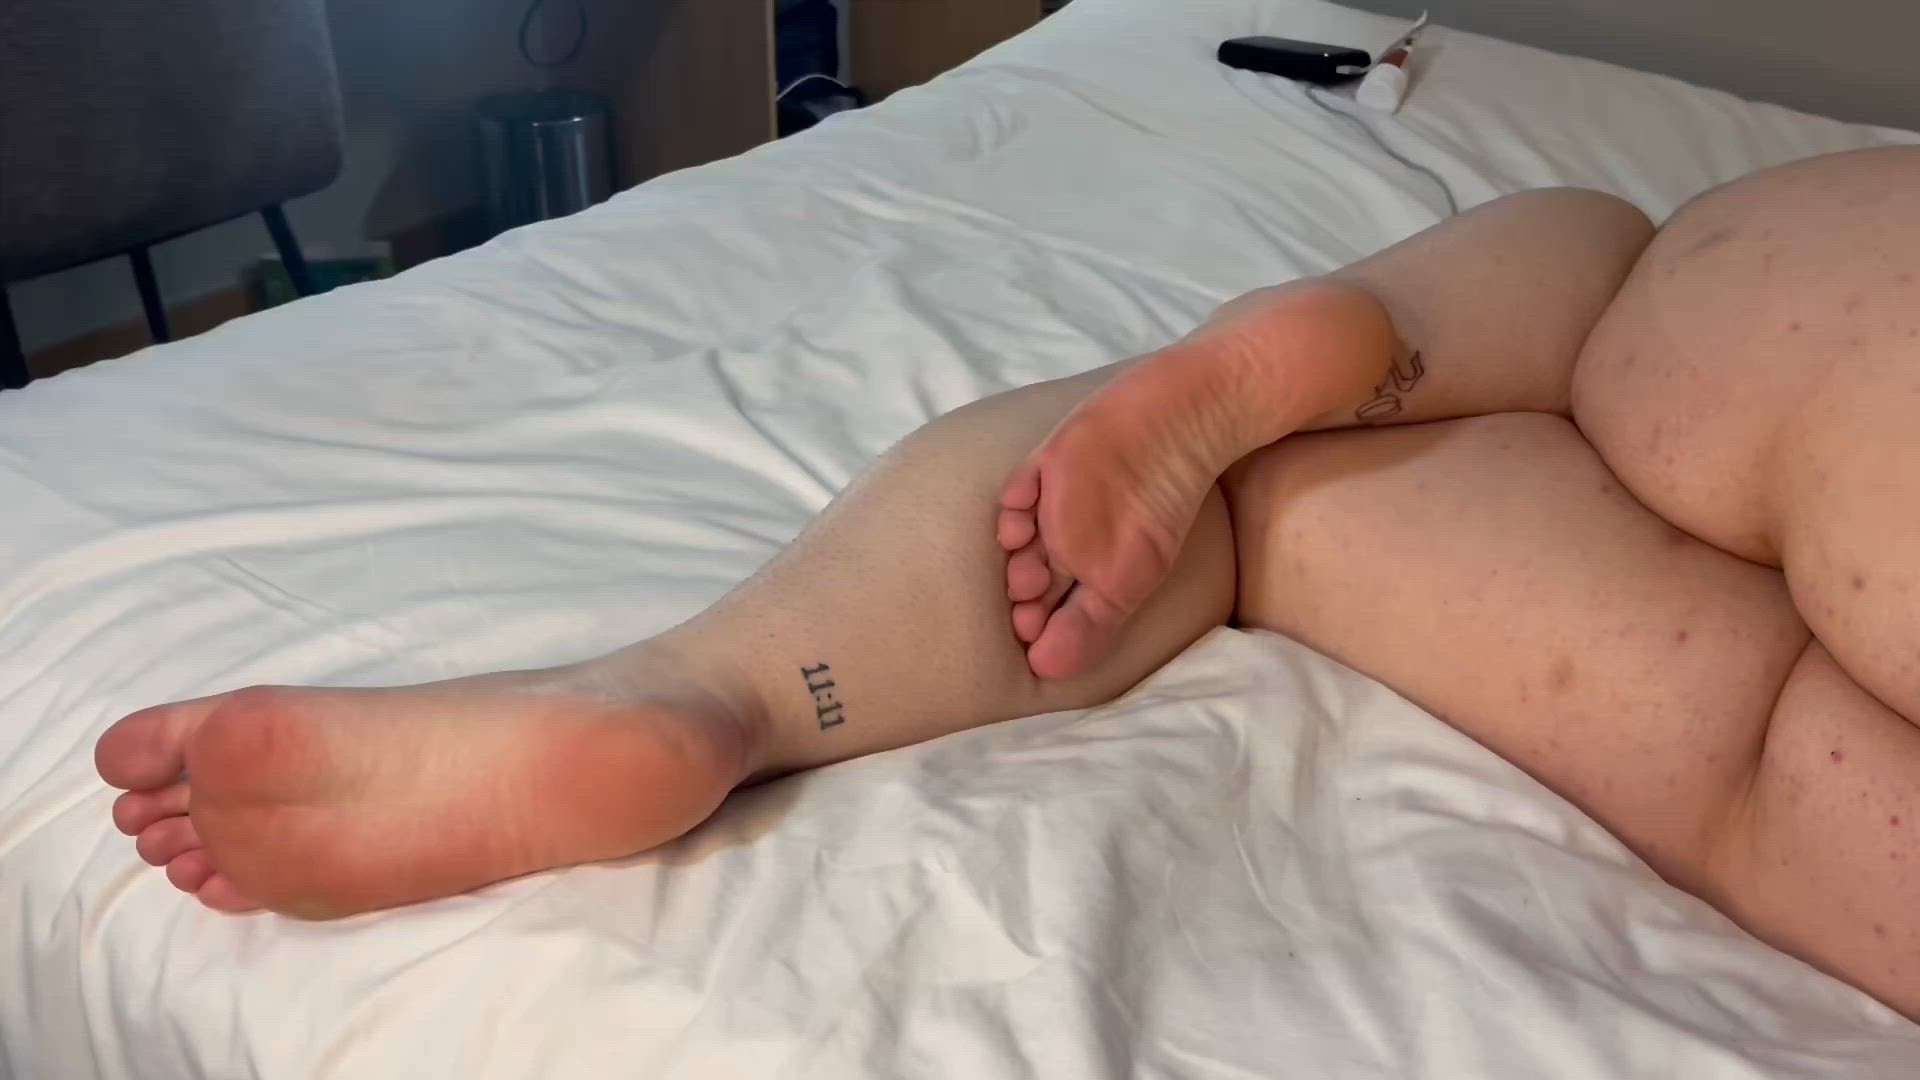 Feet porn video with onlyfans model isabellablaze <strong>@isabellablaze</strong>